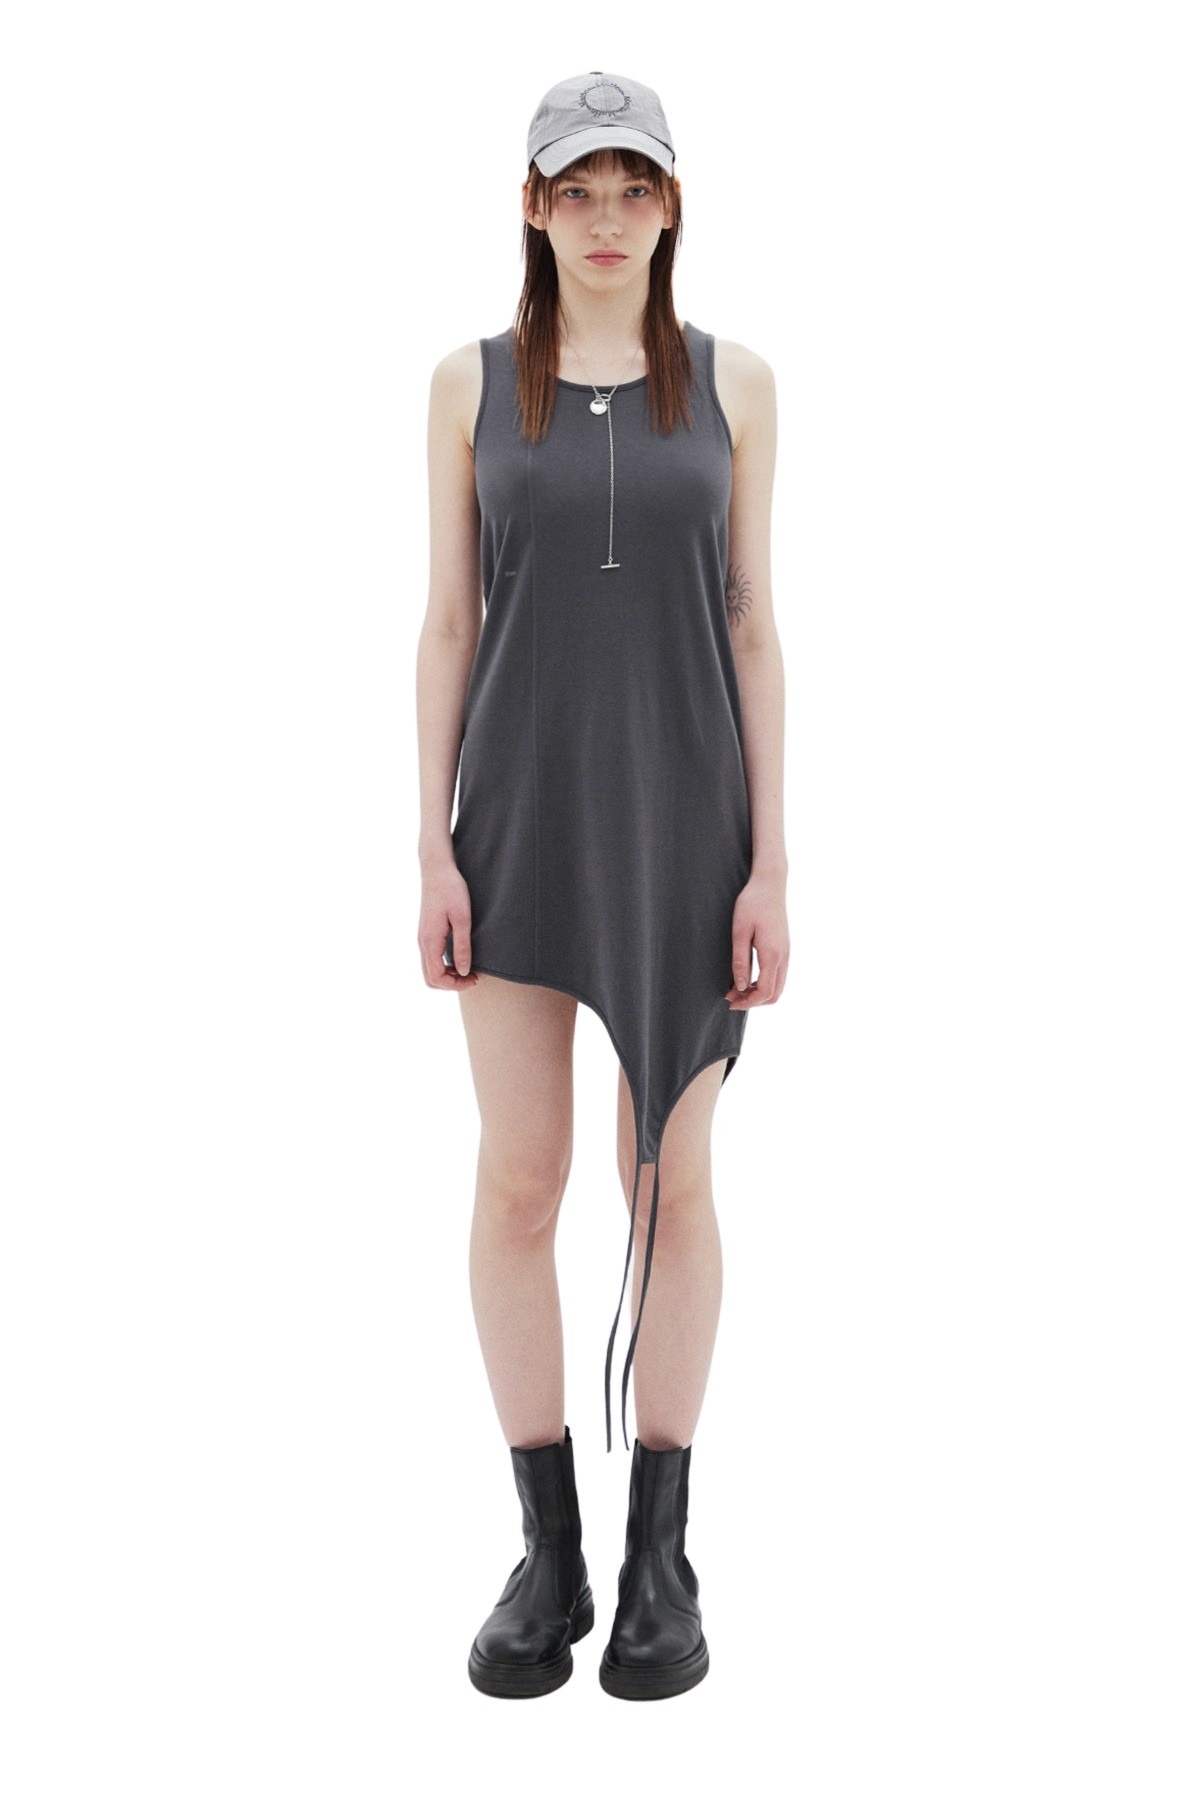 SLEEVELESS TAIL ONE PIECE IN CHARCOAL